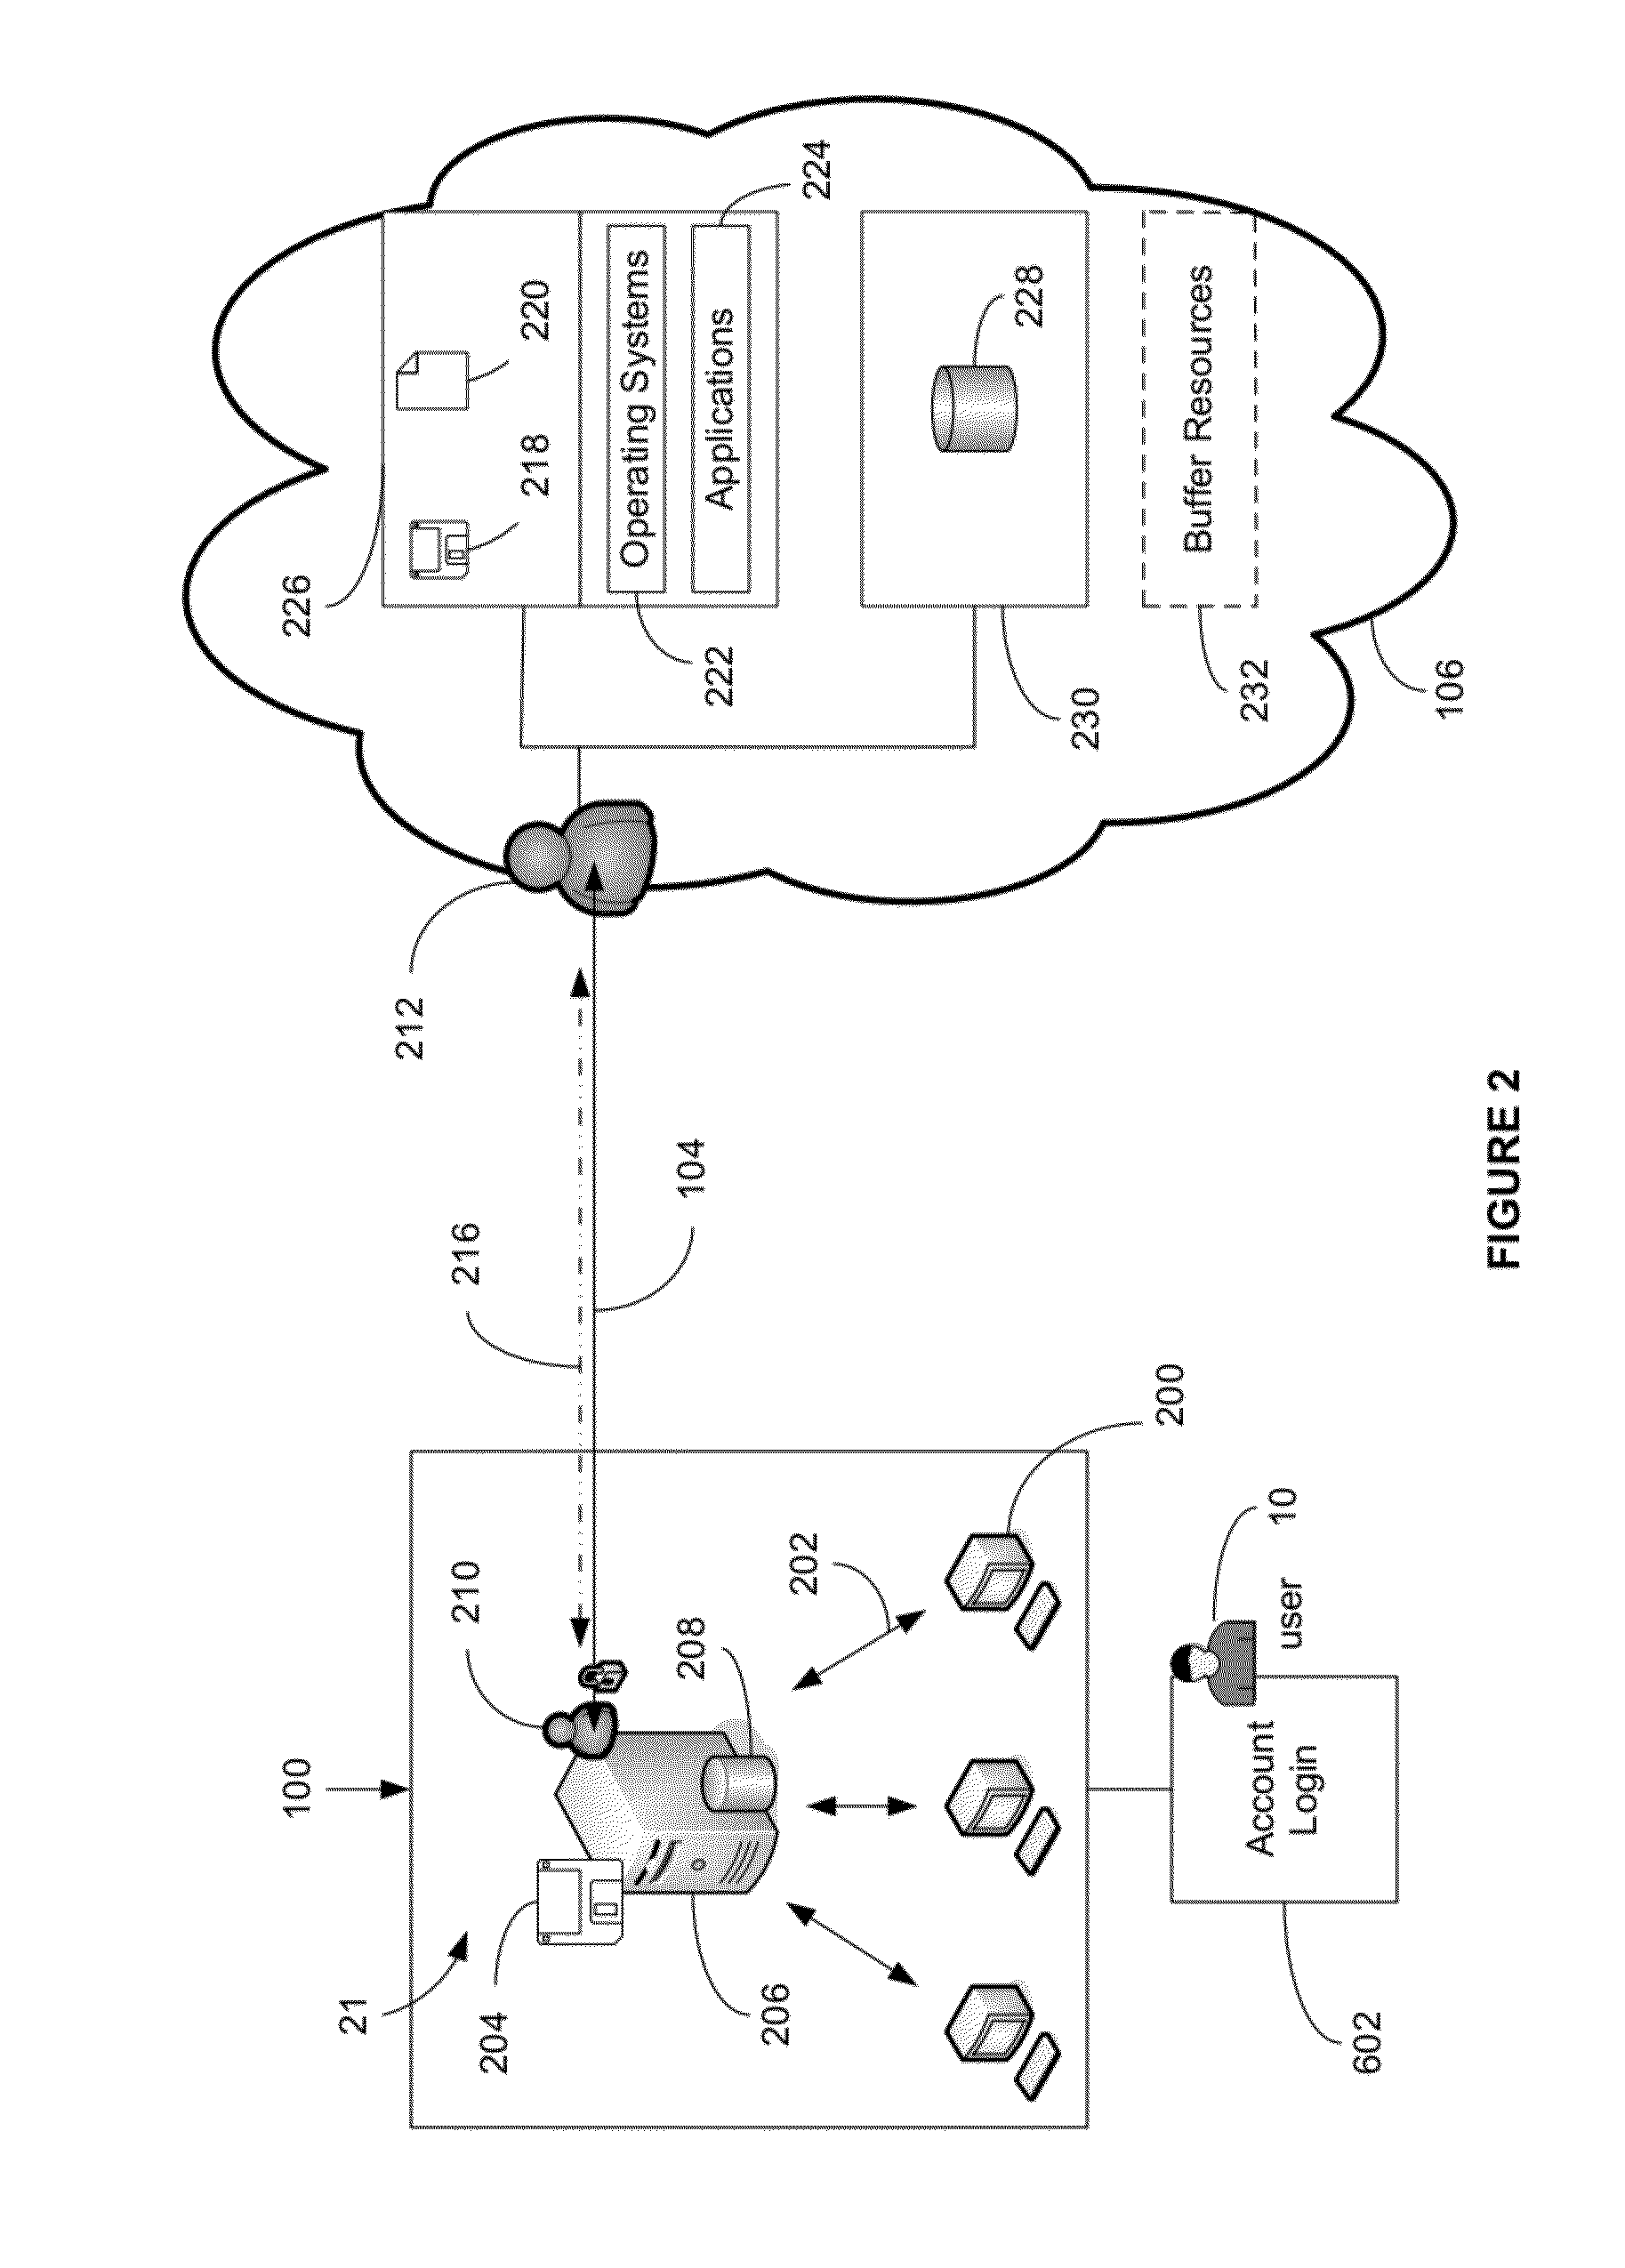 System and method for providing total real-time redundancy for a plurality of client-server systems